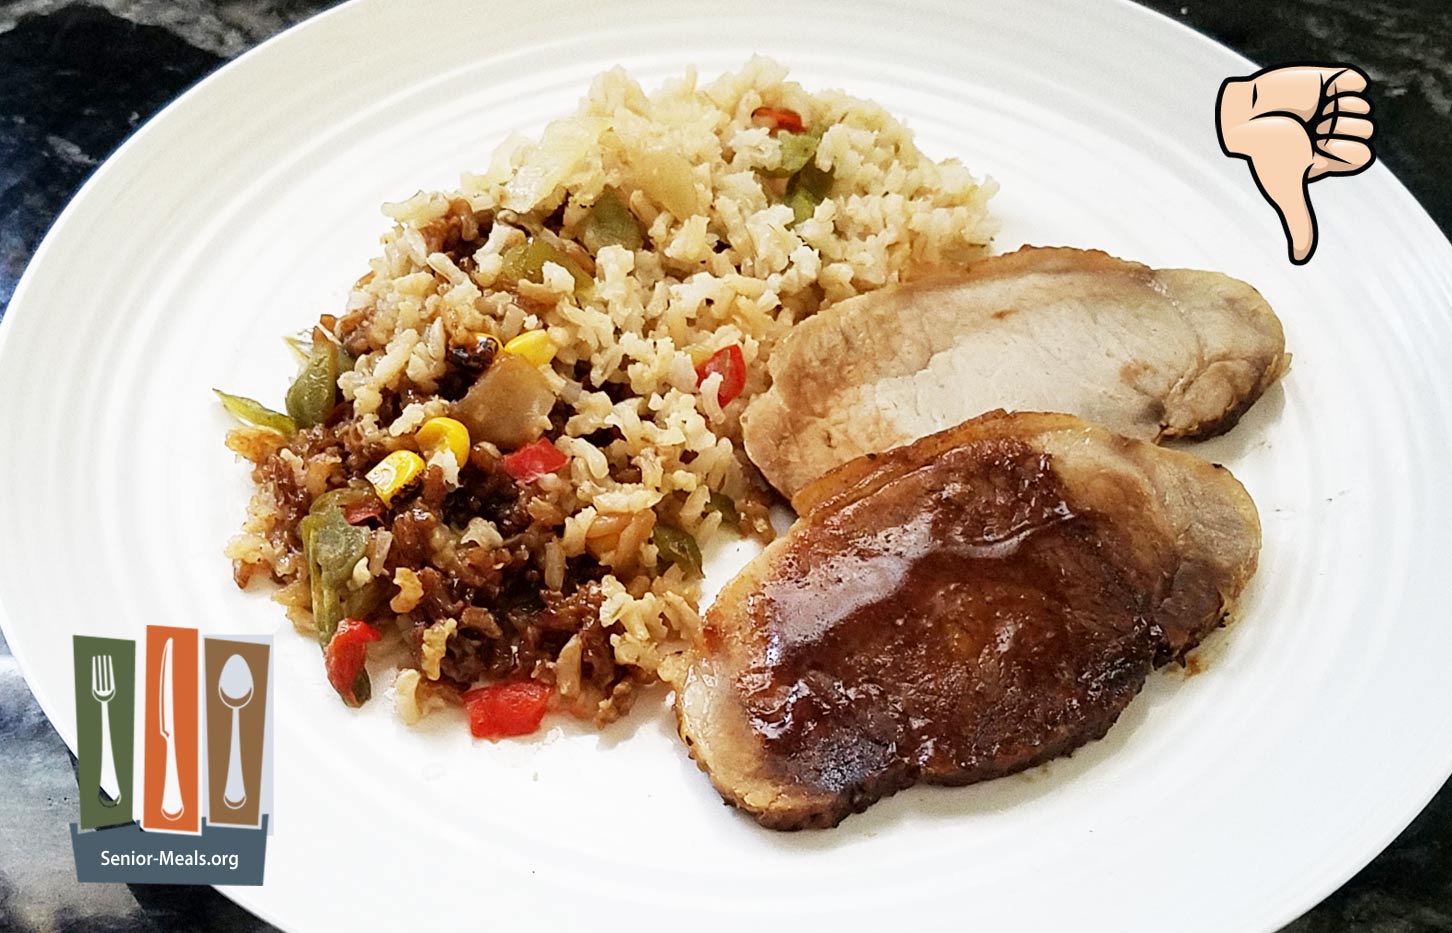 Roasted Pork with Hickory Barbecue Sauce over Southwestern Style Rice and Mixed Vegetables  - $12